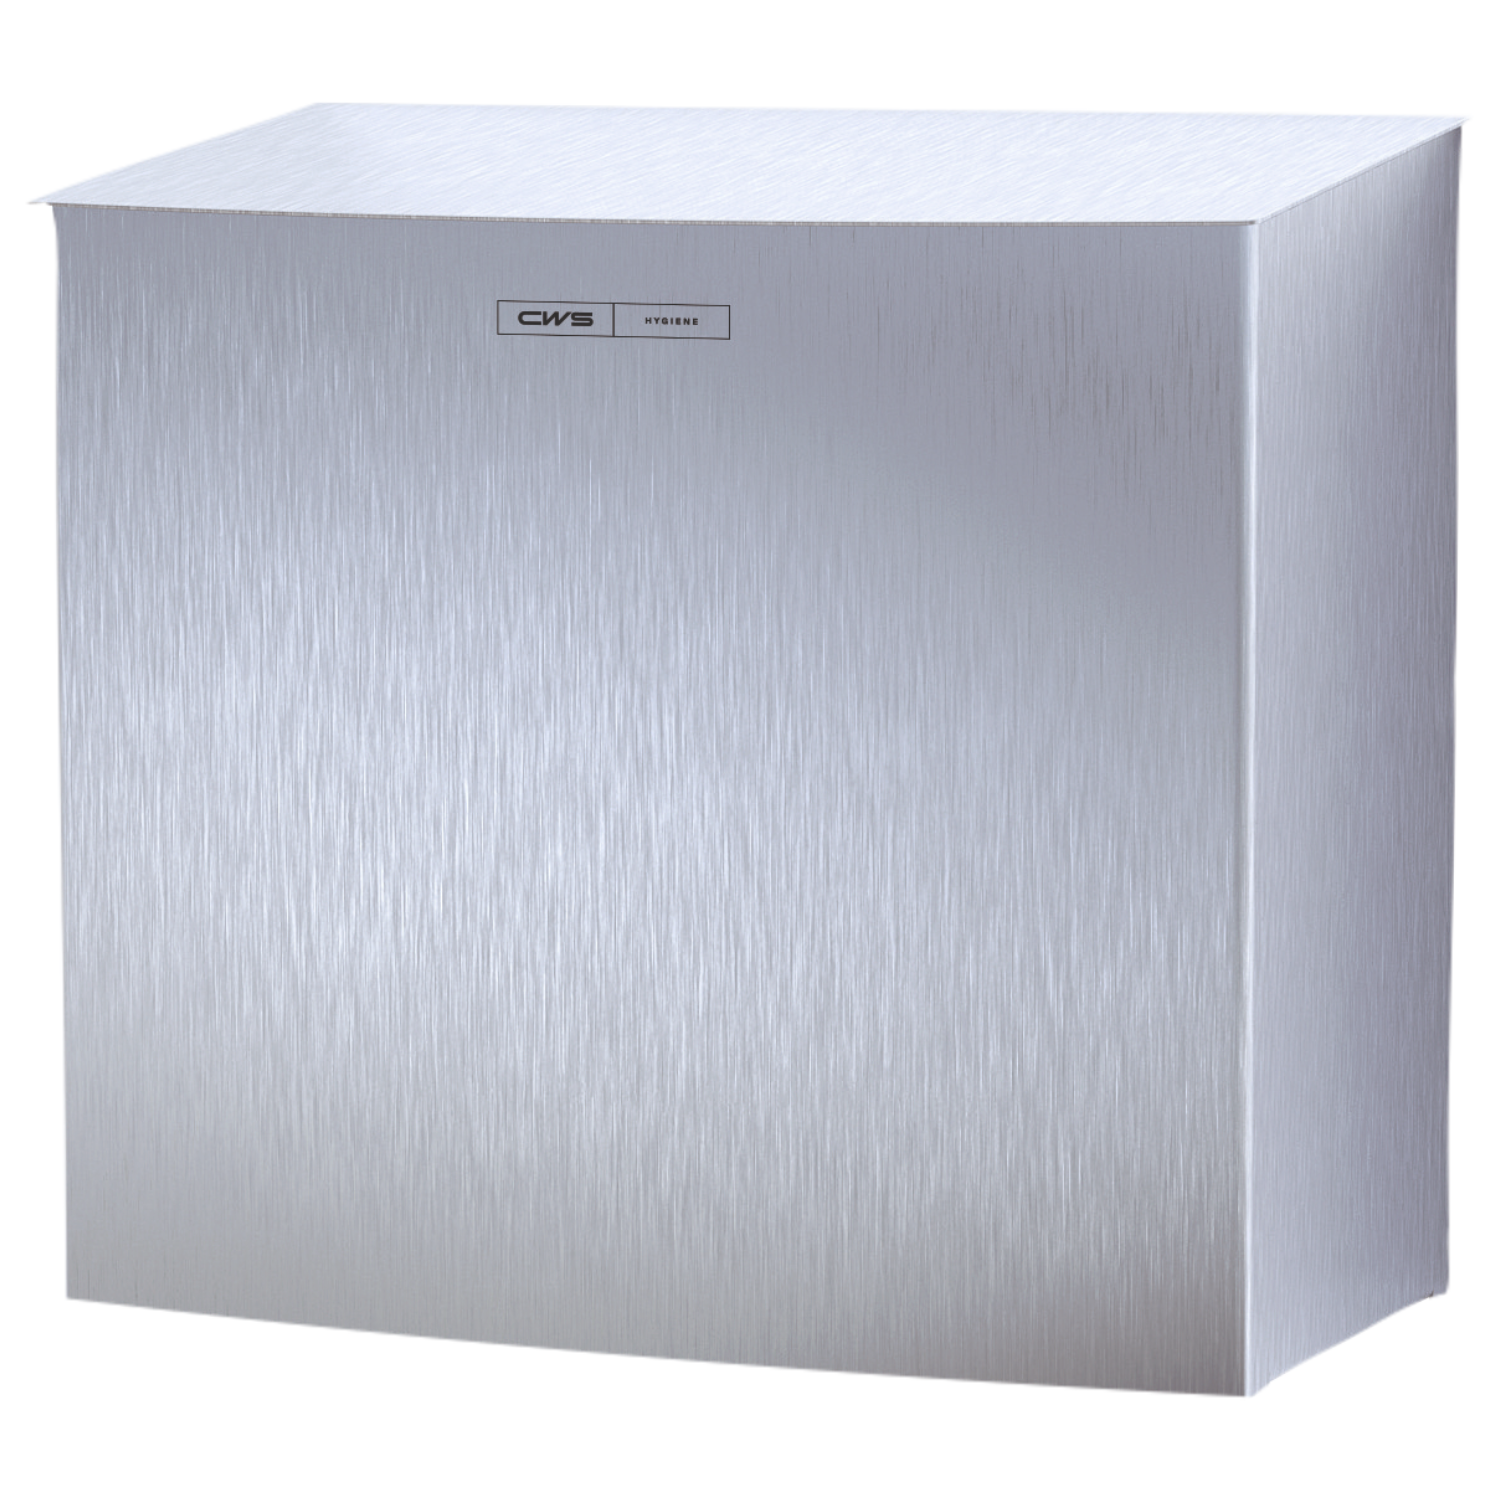 CWS Paradise Stainless Steel Hygiene Box 6 L